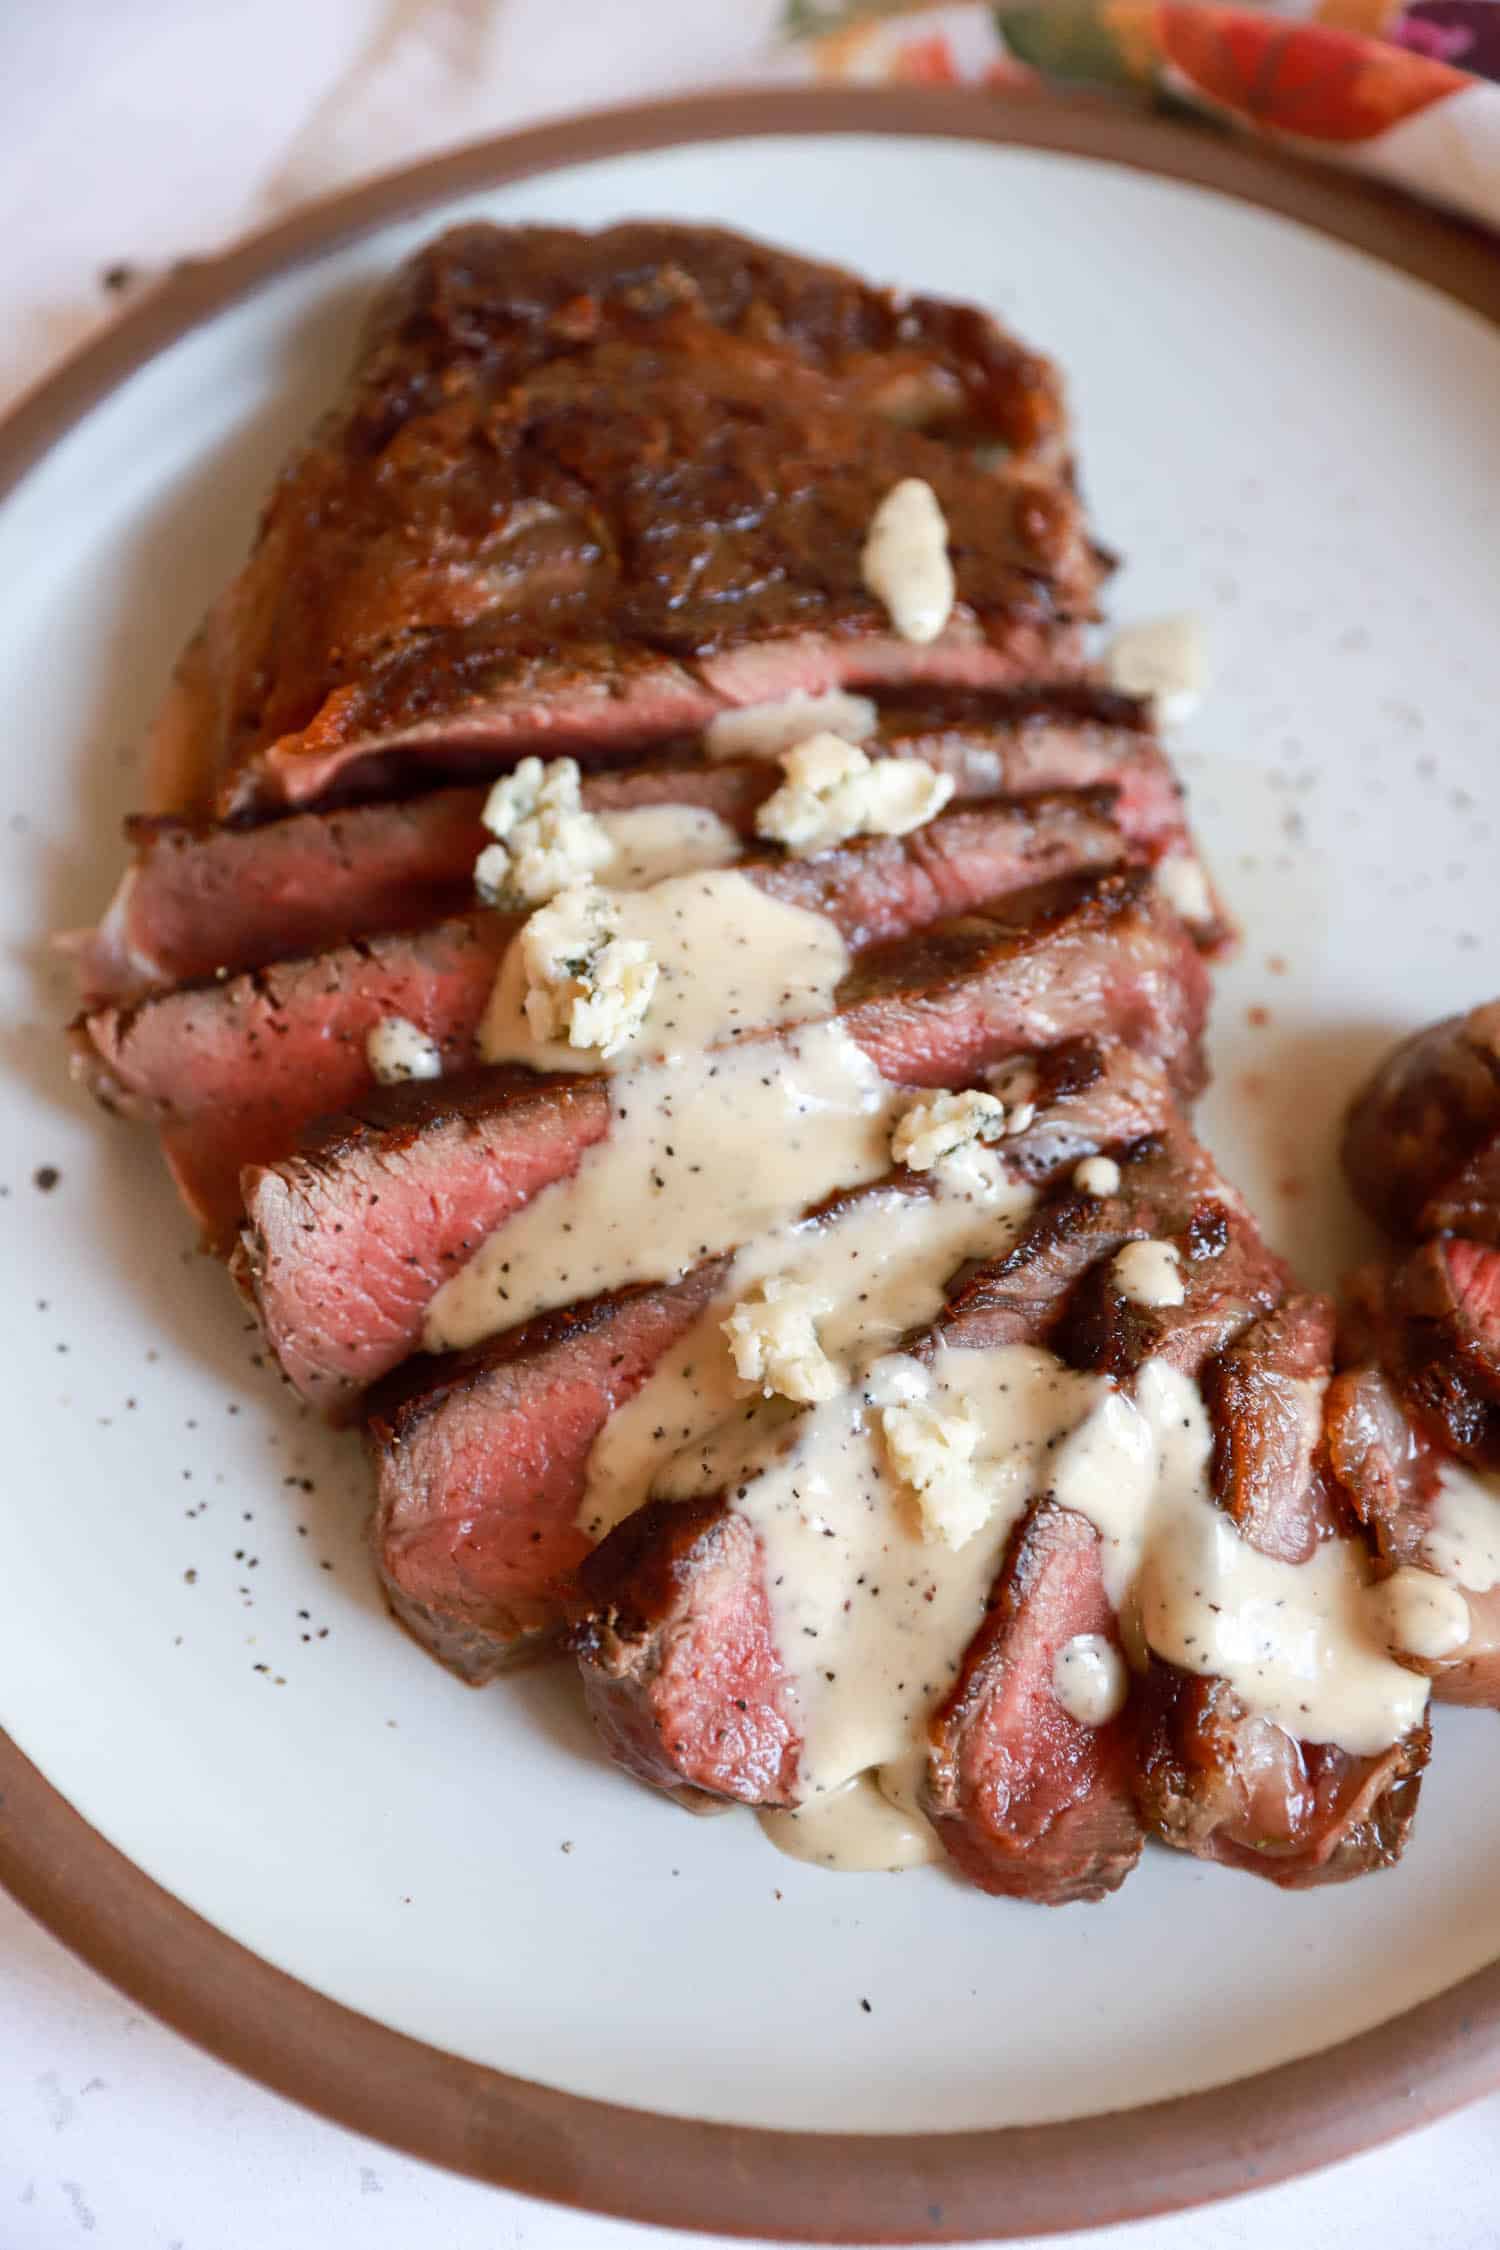 Thickly sliced rare steak with blue cheese sauce drizzled over top.